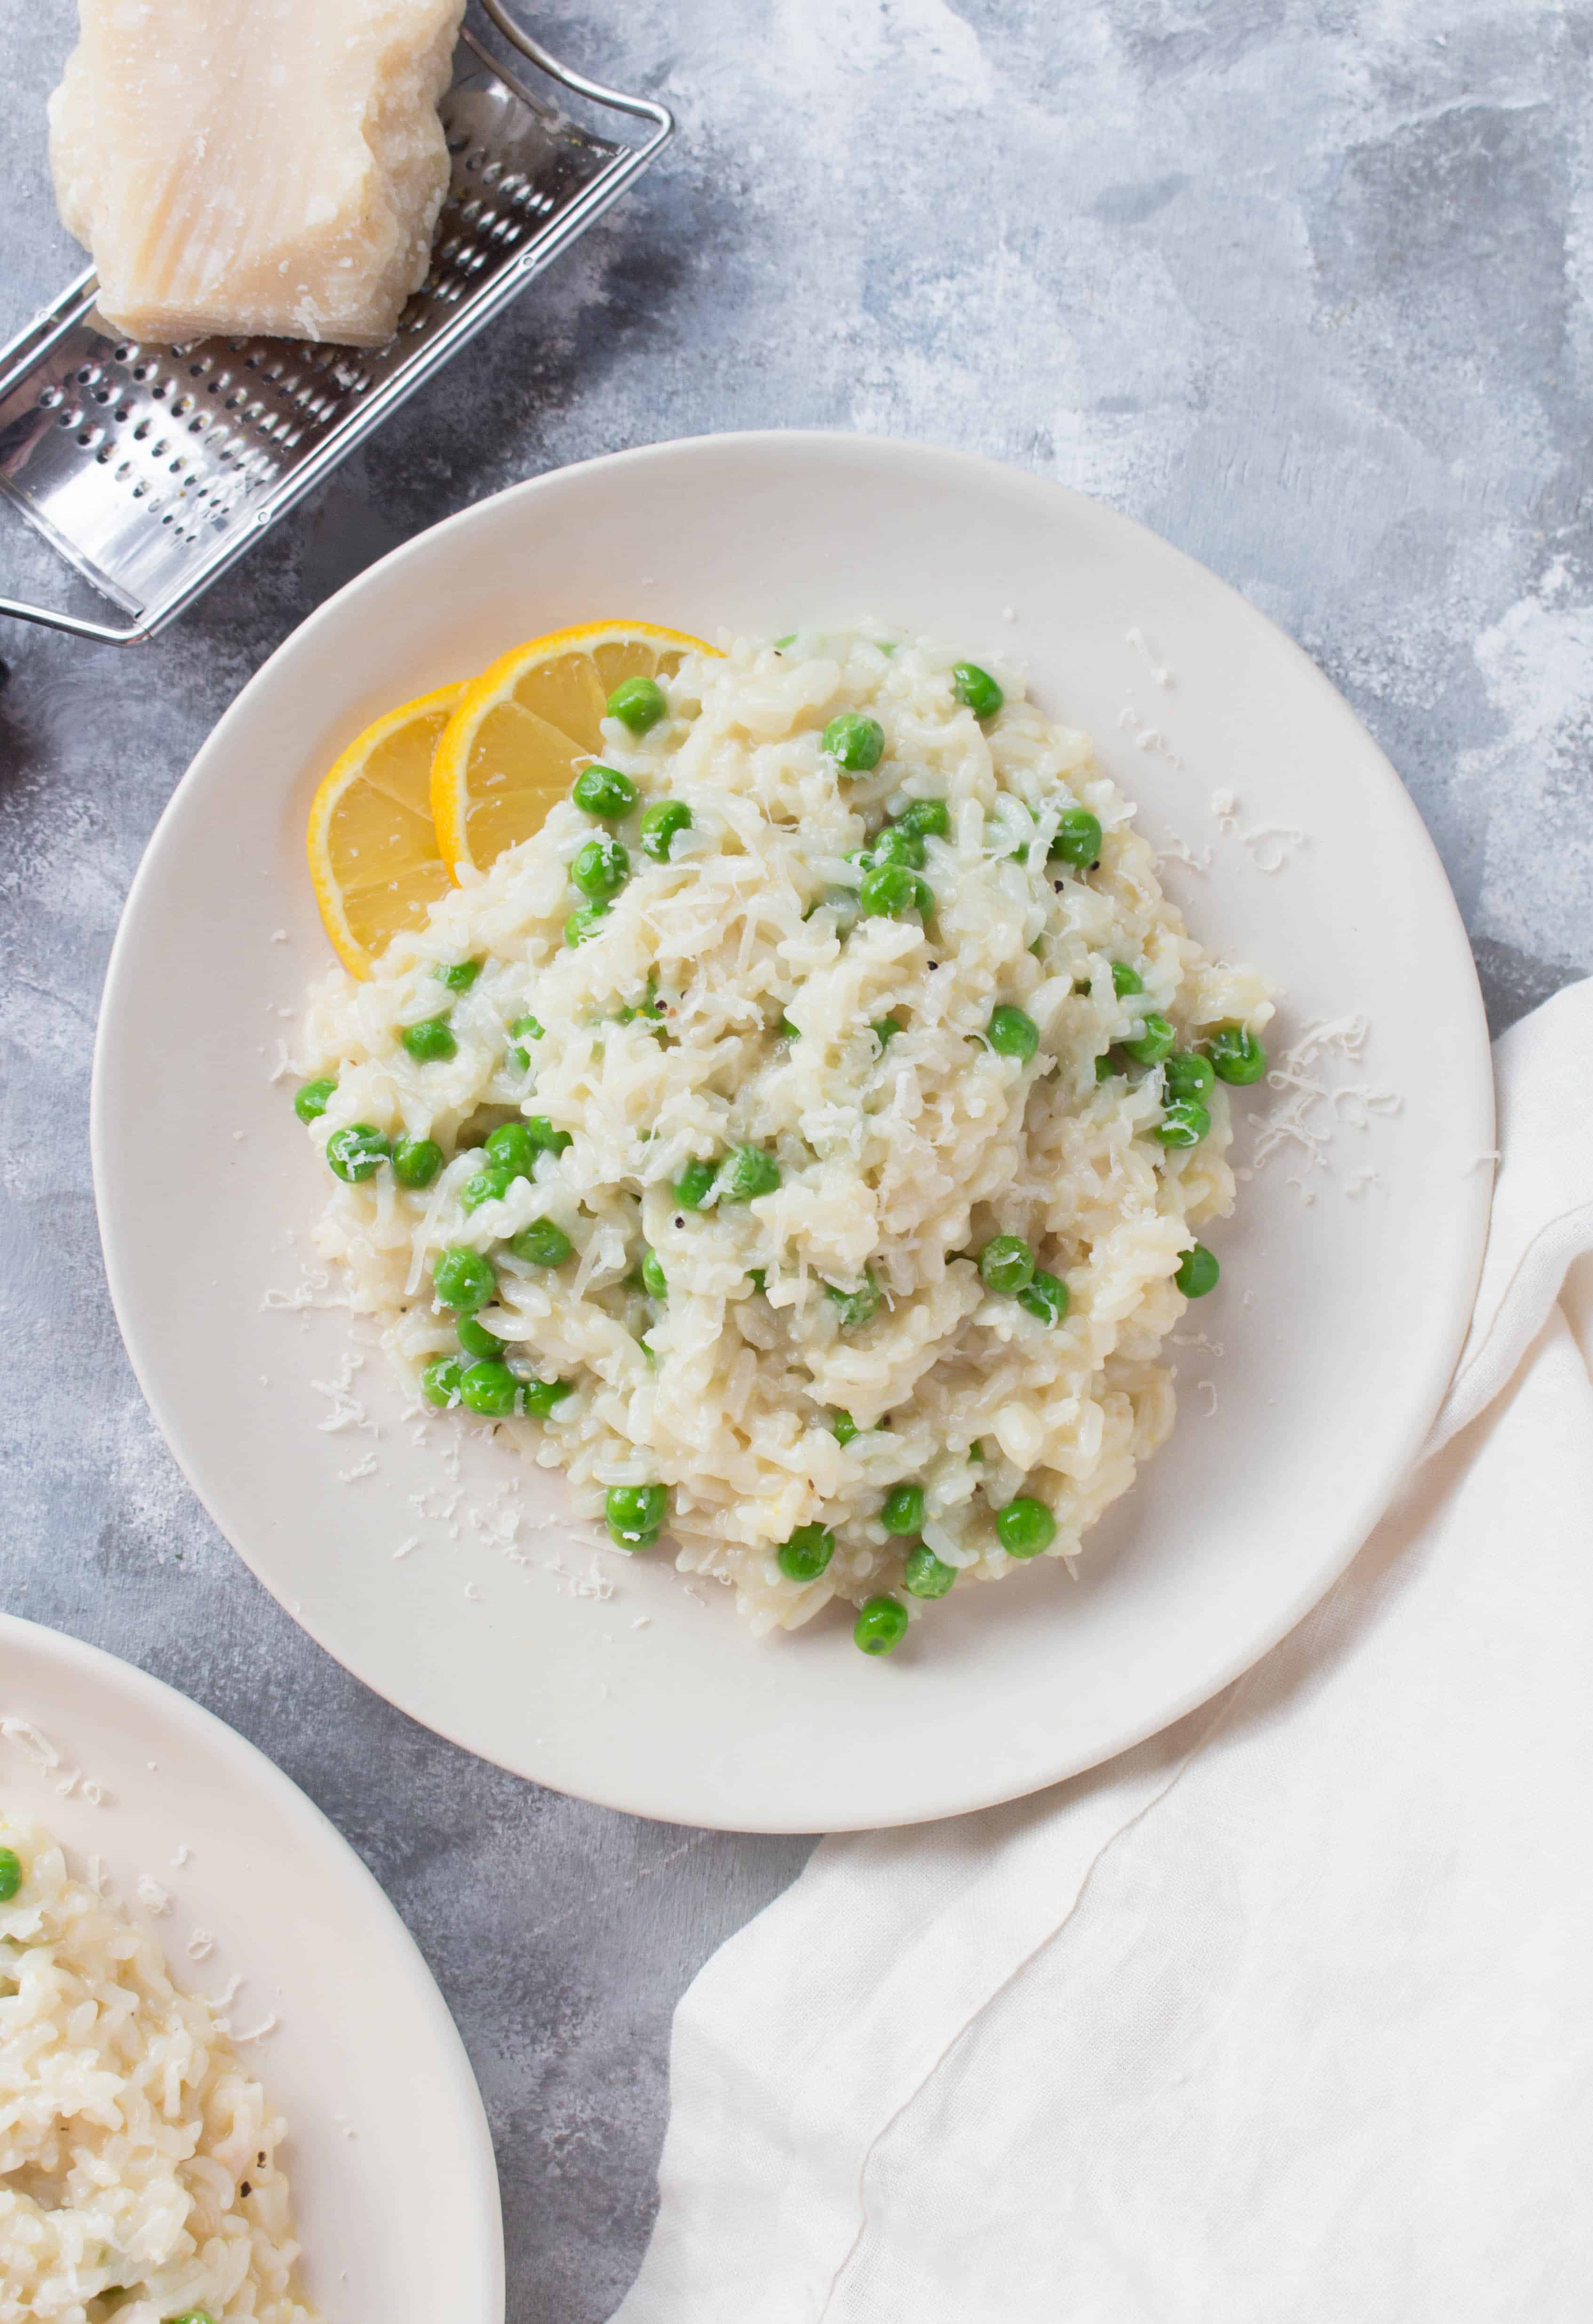 This Instant Pot Lemon Pea Risotto is a show stopper but secretly only takes a couple minutes to put together! Impress your guests by serving this pretty but simple dinner!